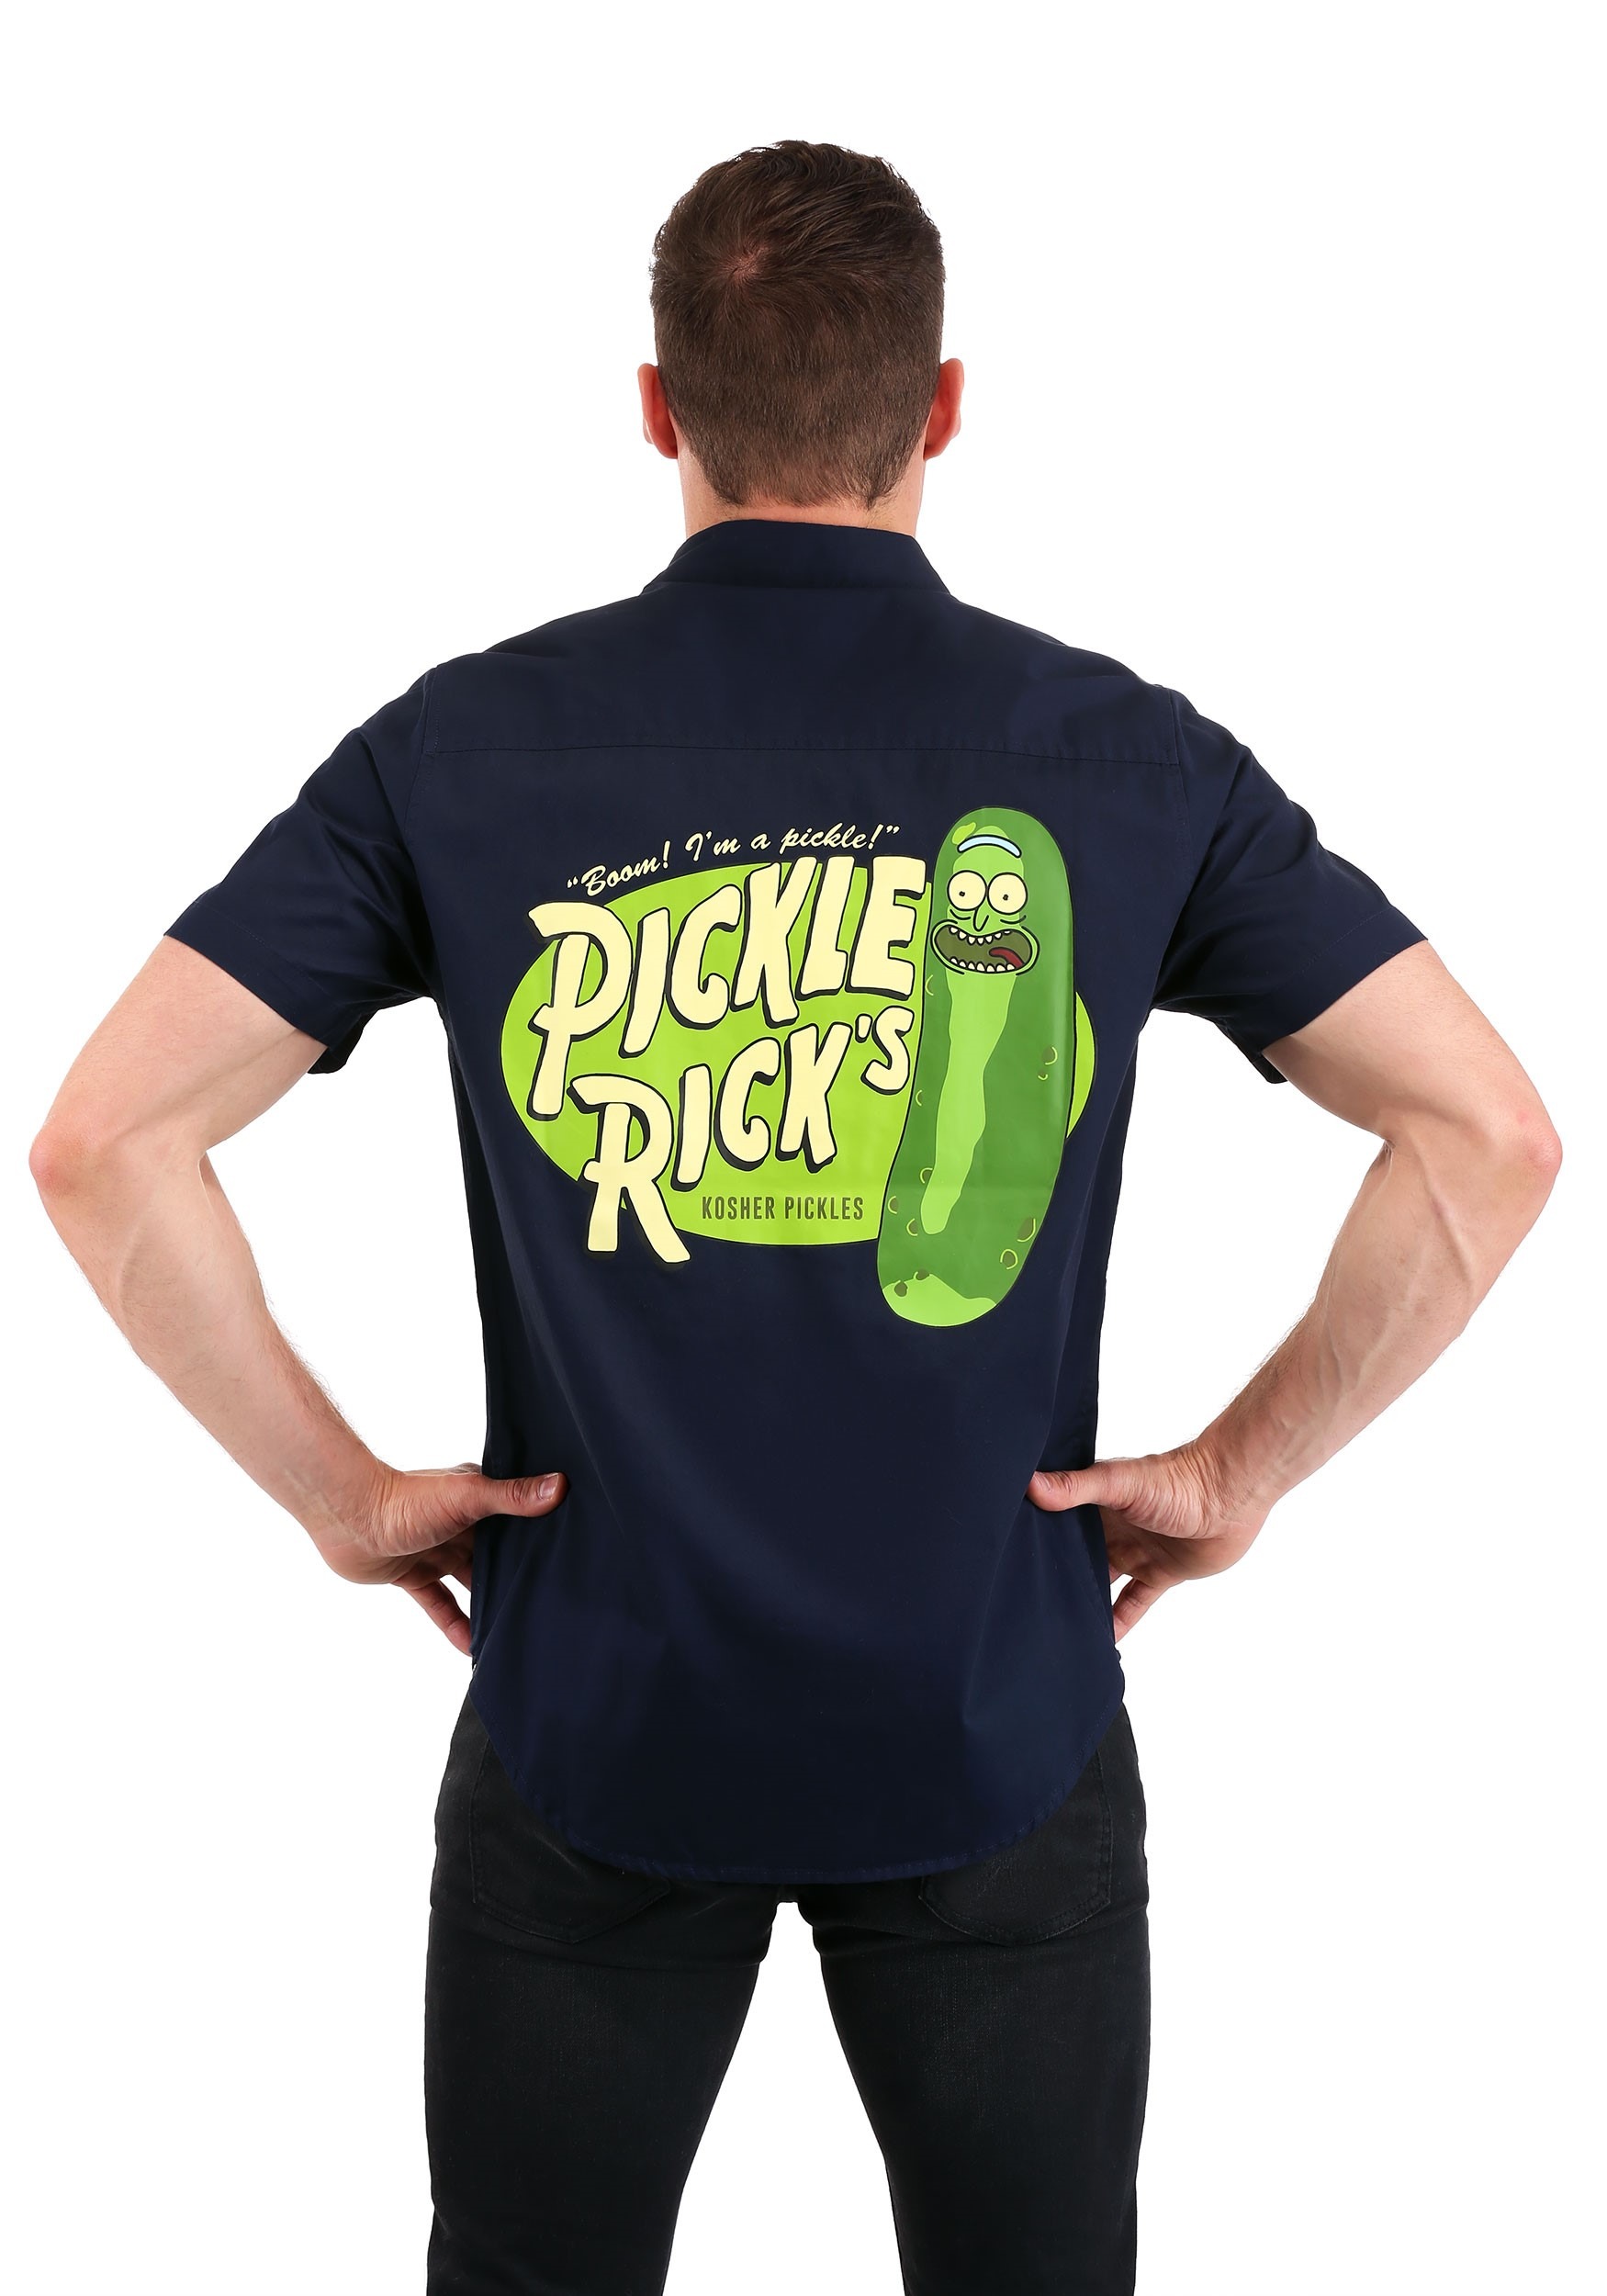 Classic Pickle Rick  Woman/'s Shirt Olive Green Medium M Details about  / Rick and Morty